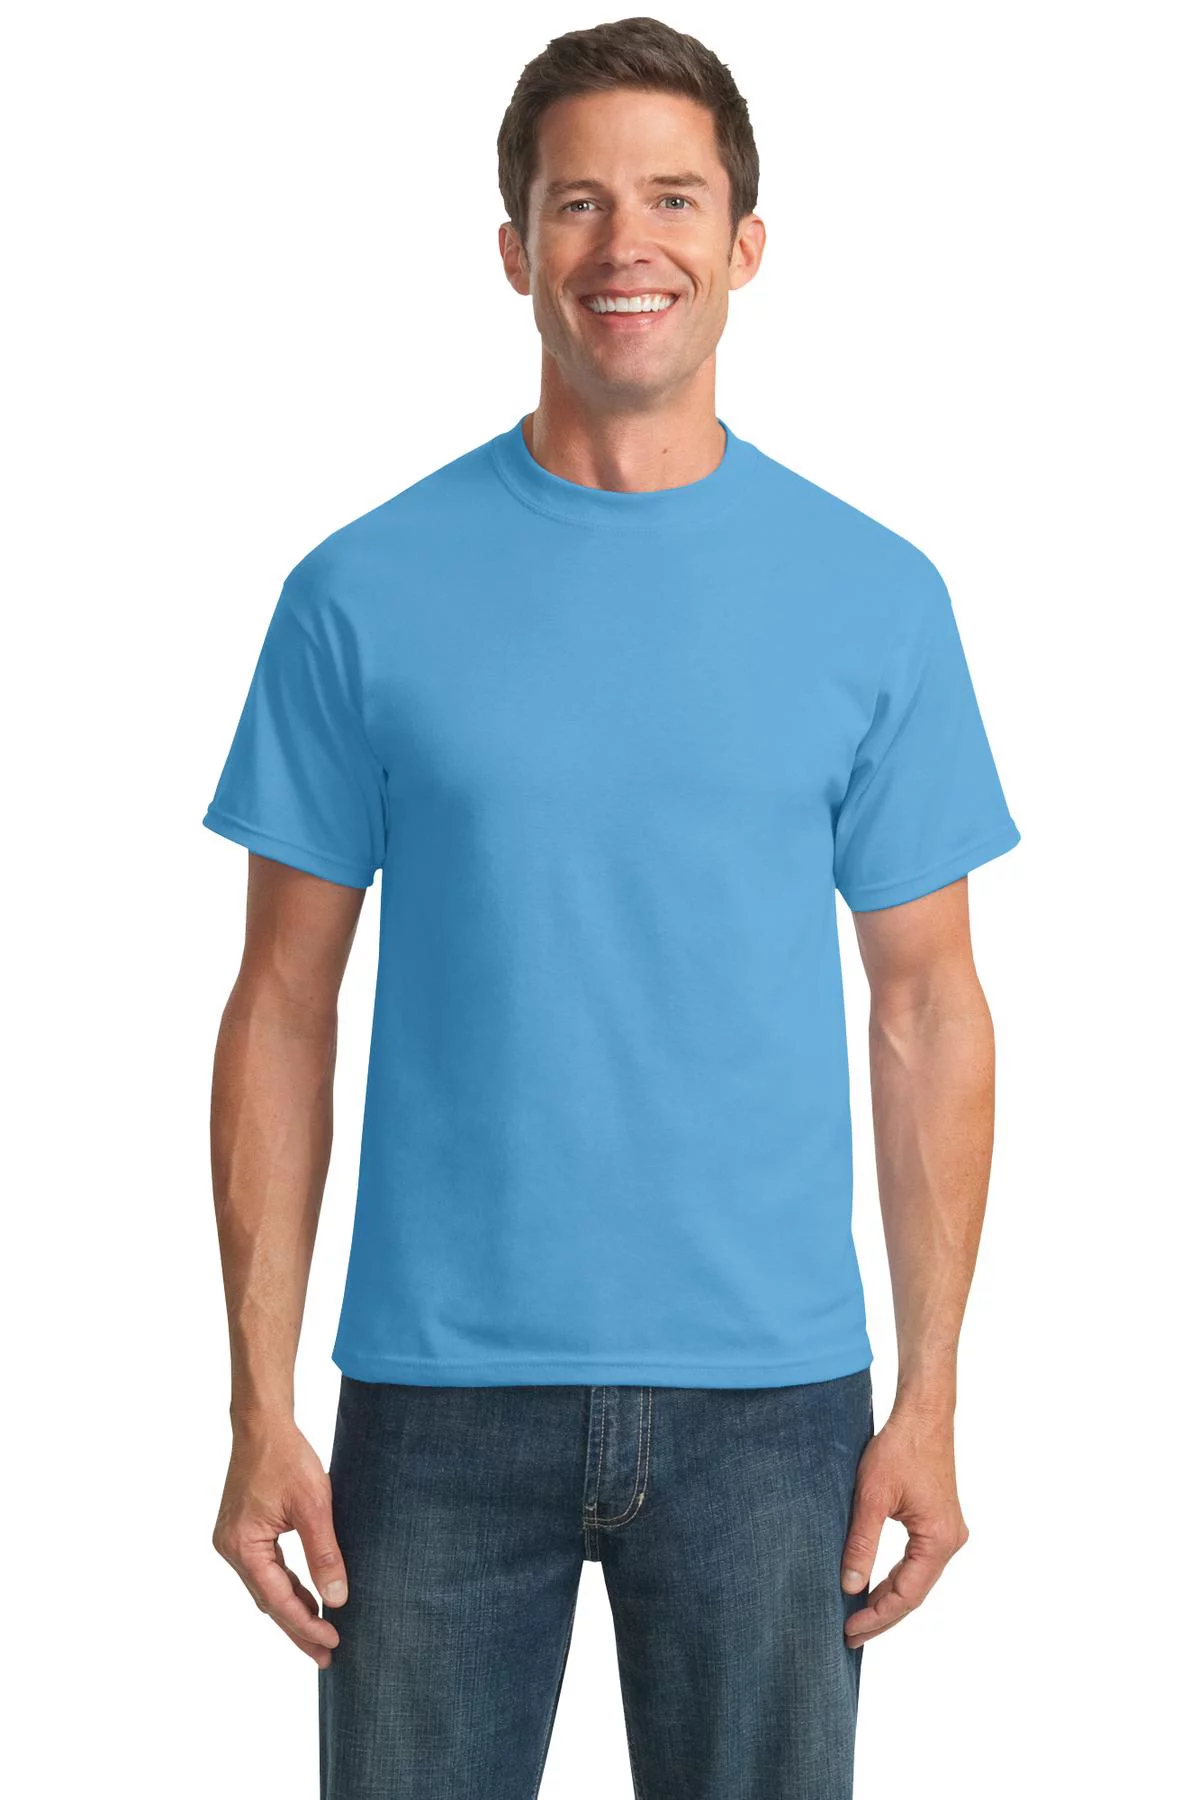 Stay Stylish and Comfortable with T Shirt Royal 3X Large Tall A Review